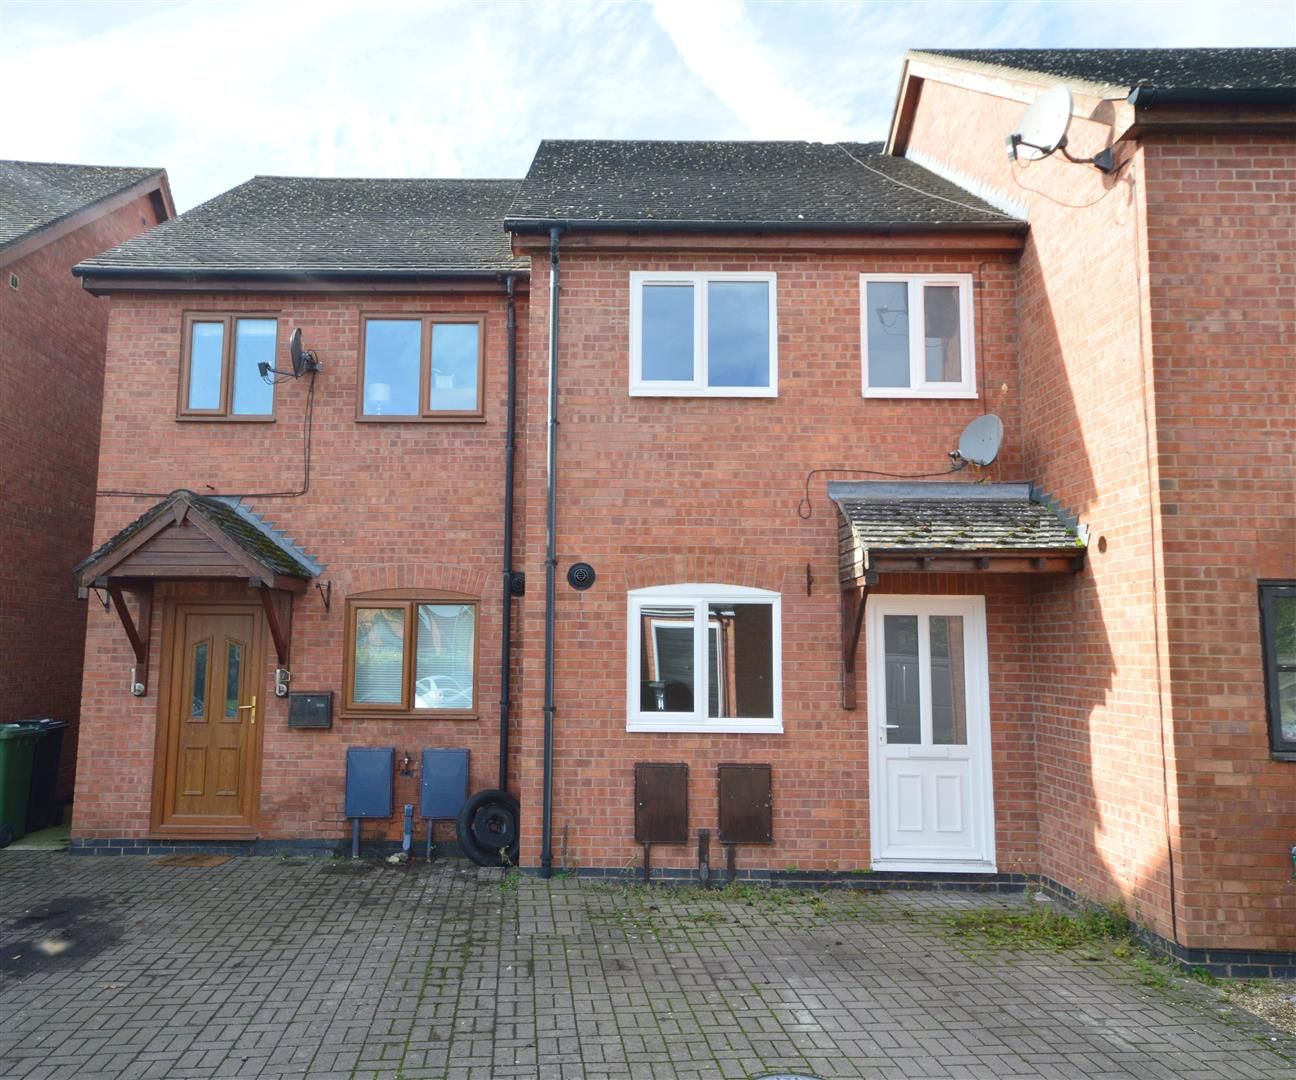 2 bed terraced for sale in Lower Bullingham  - Property Image 2